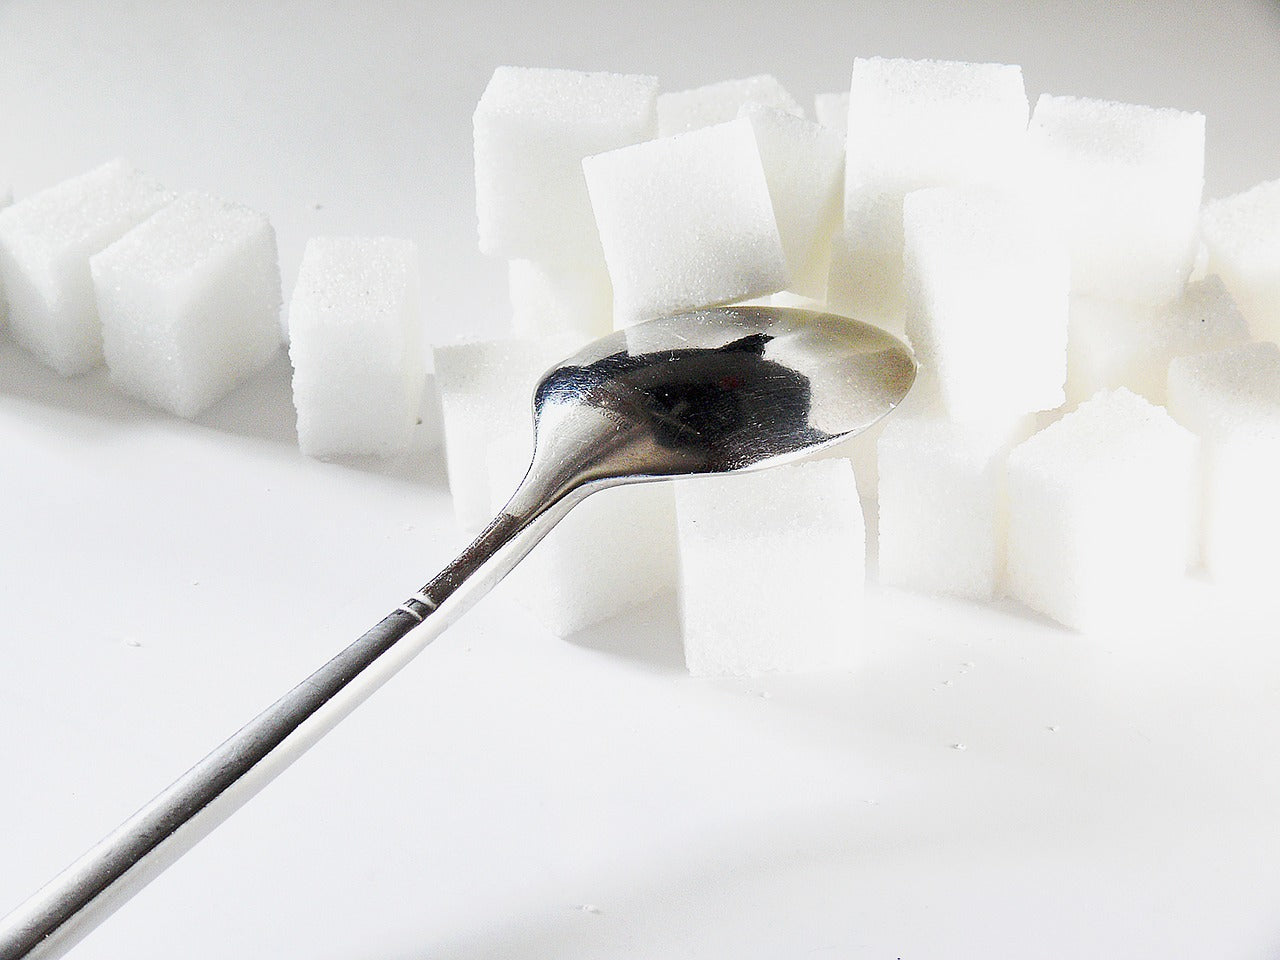 10 Reasons To Drop Sugar From Your Diet